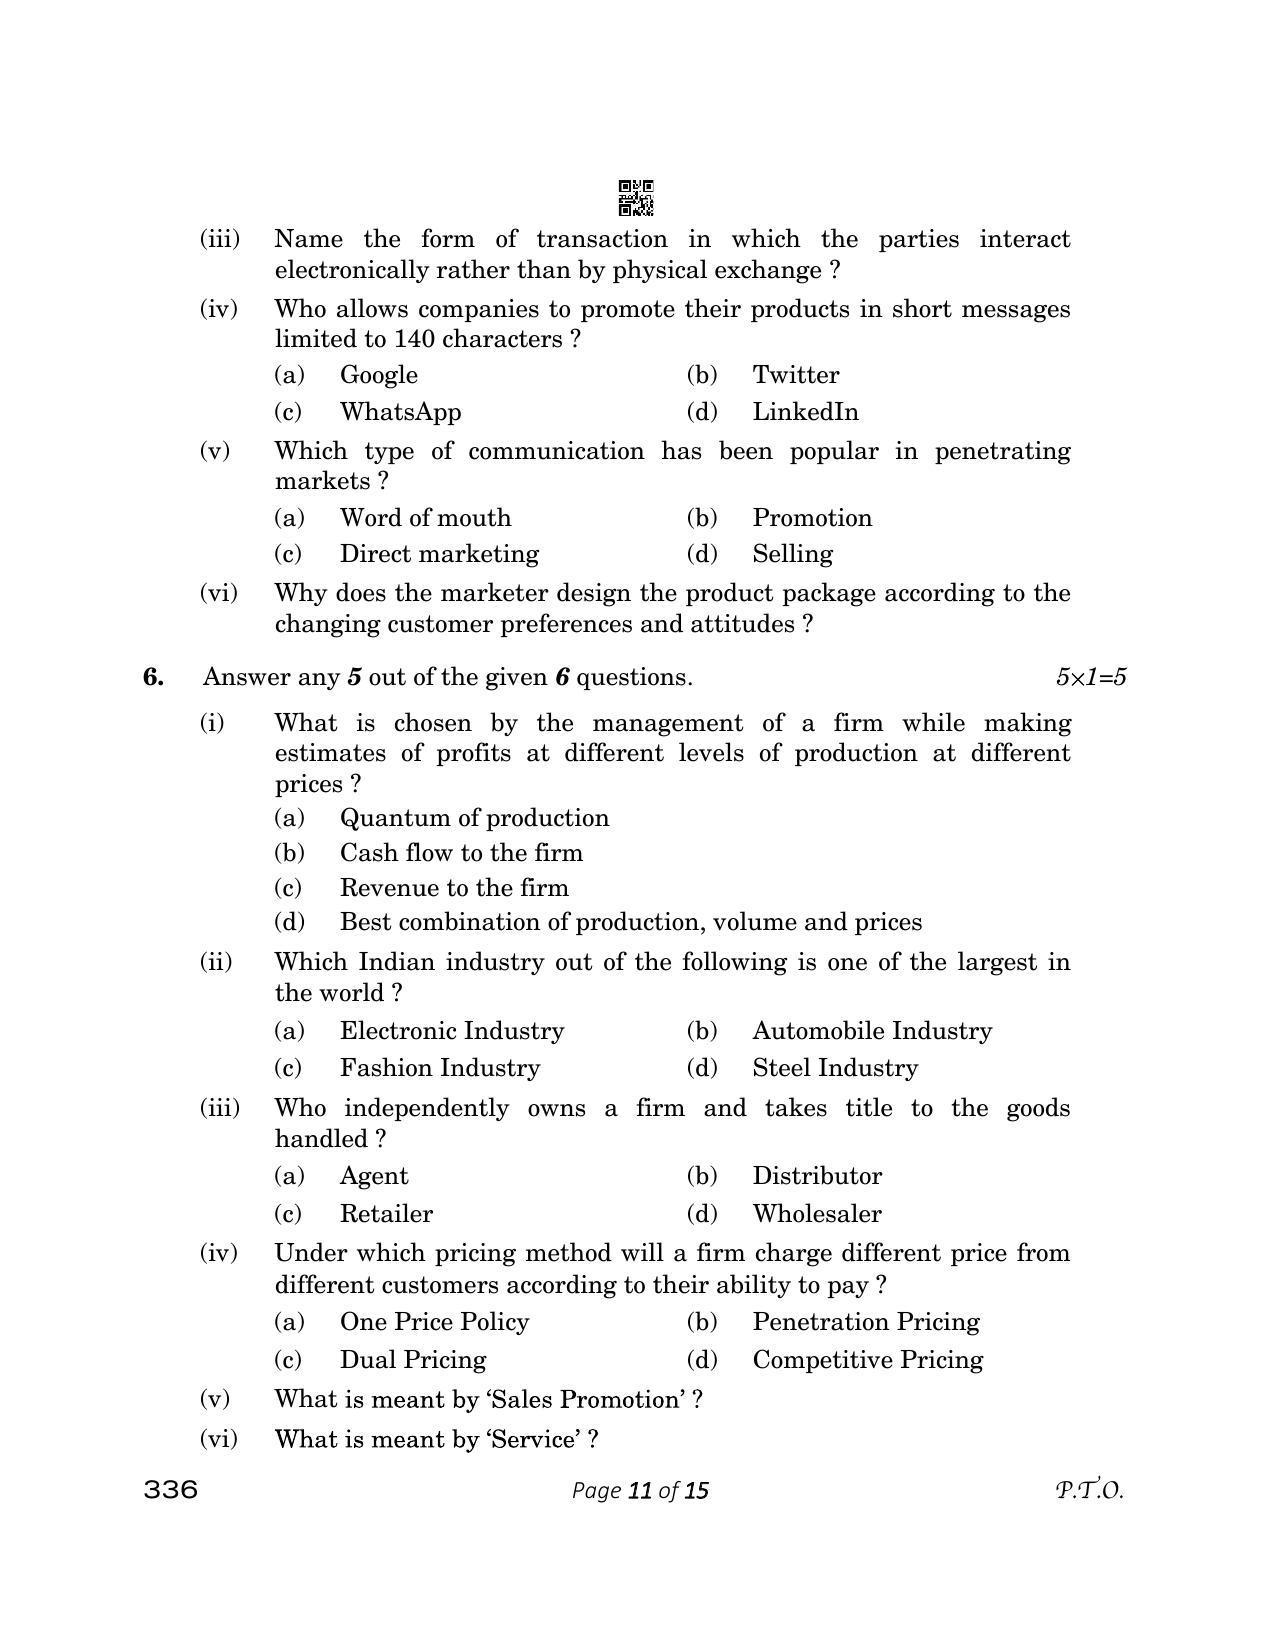 CBSE Class 12 336_ Marketing 2023 Question Paper - Page 11